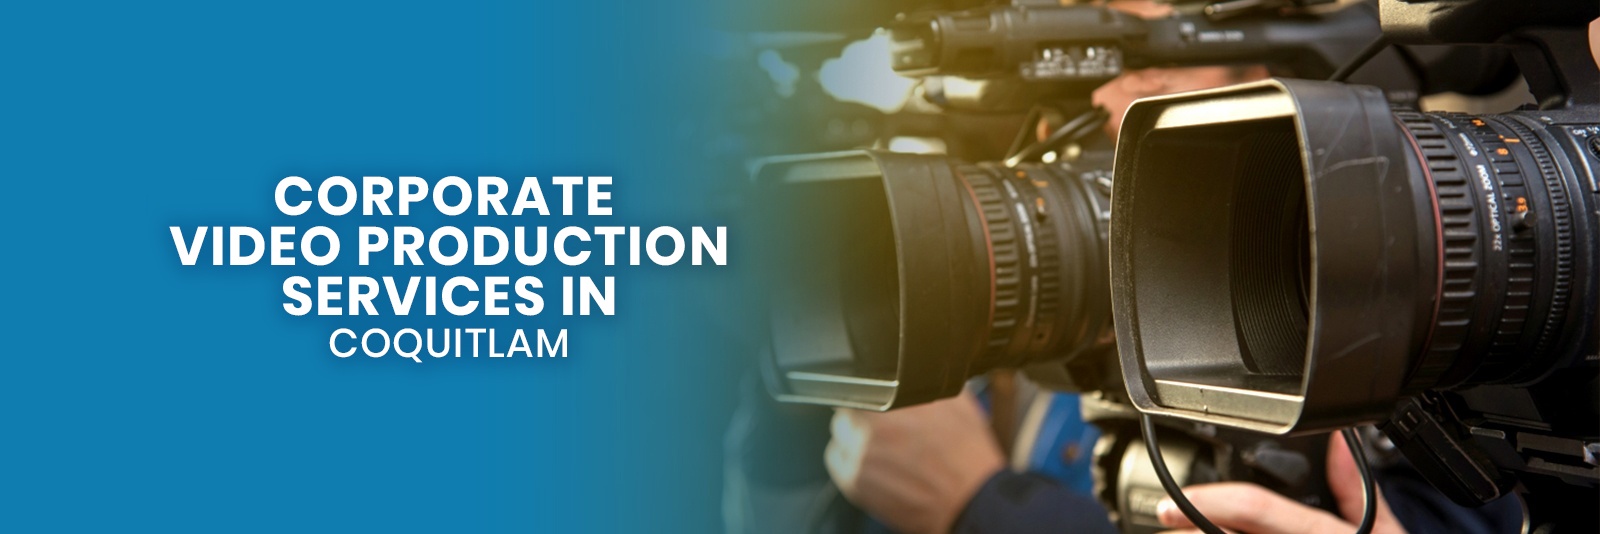 Video Production Services In Coquitlam 